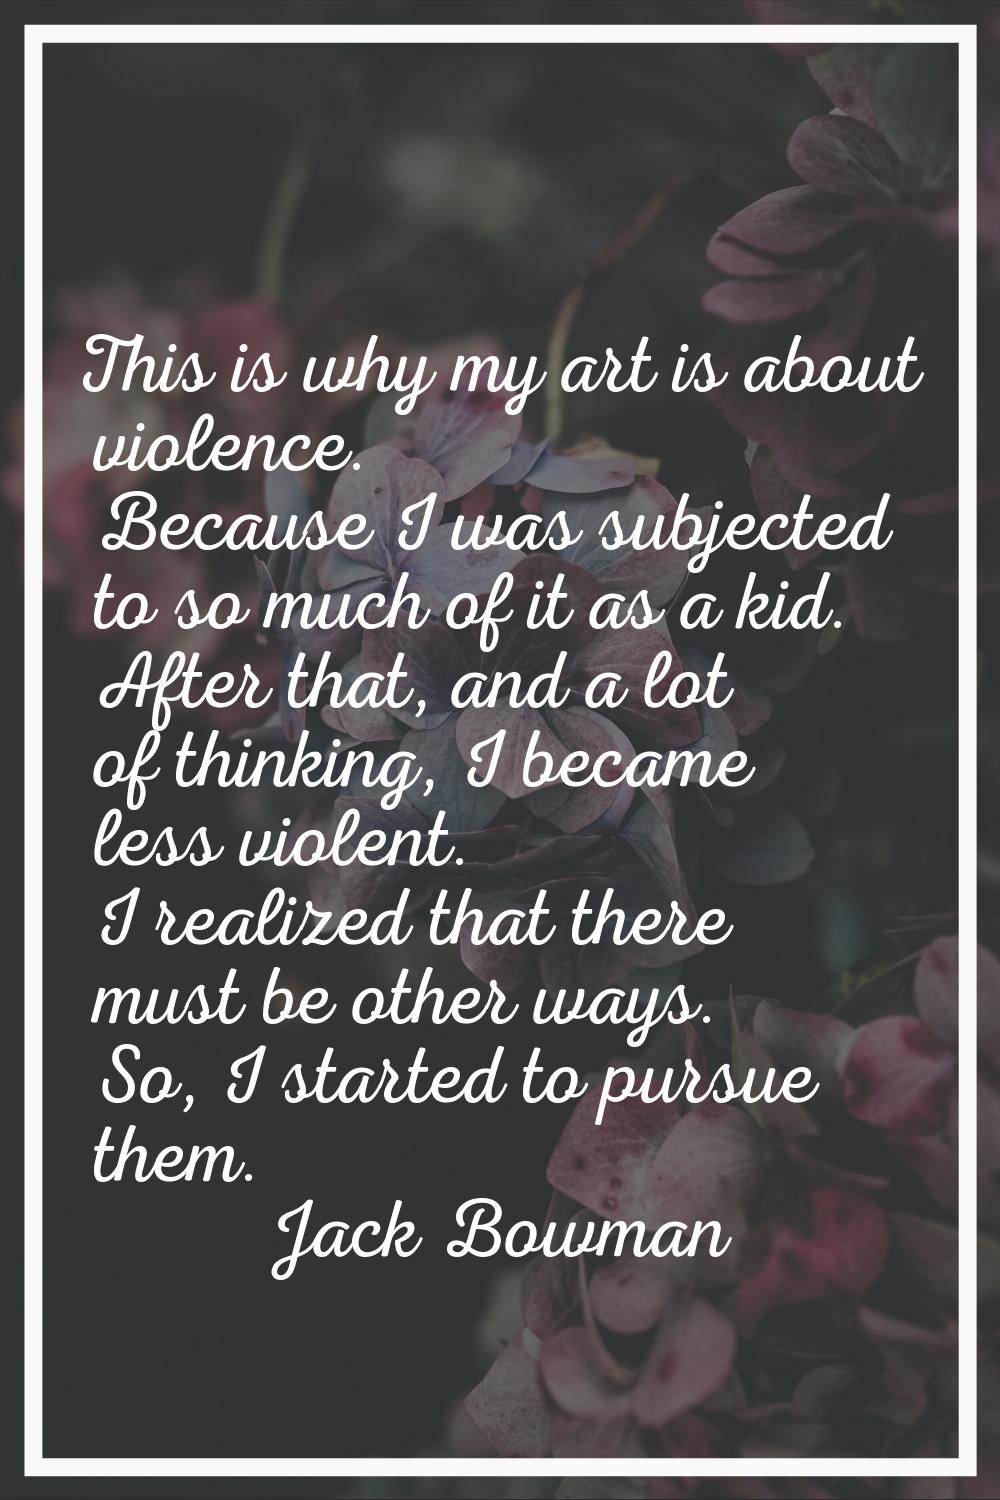 This is why my art is about violence. Because I was subjected to so much of it as a kid. After that